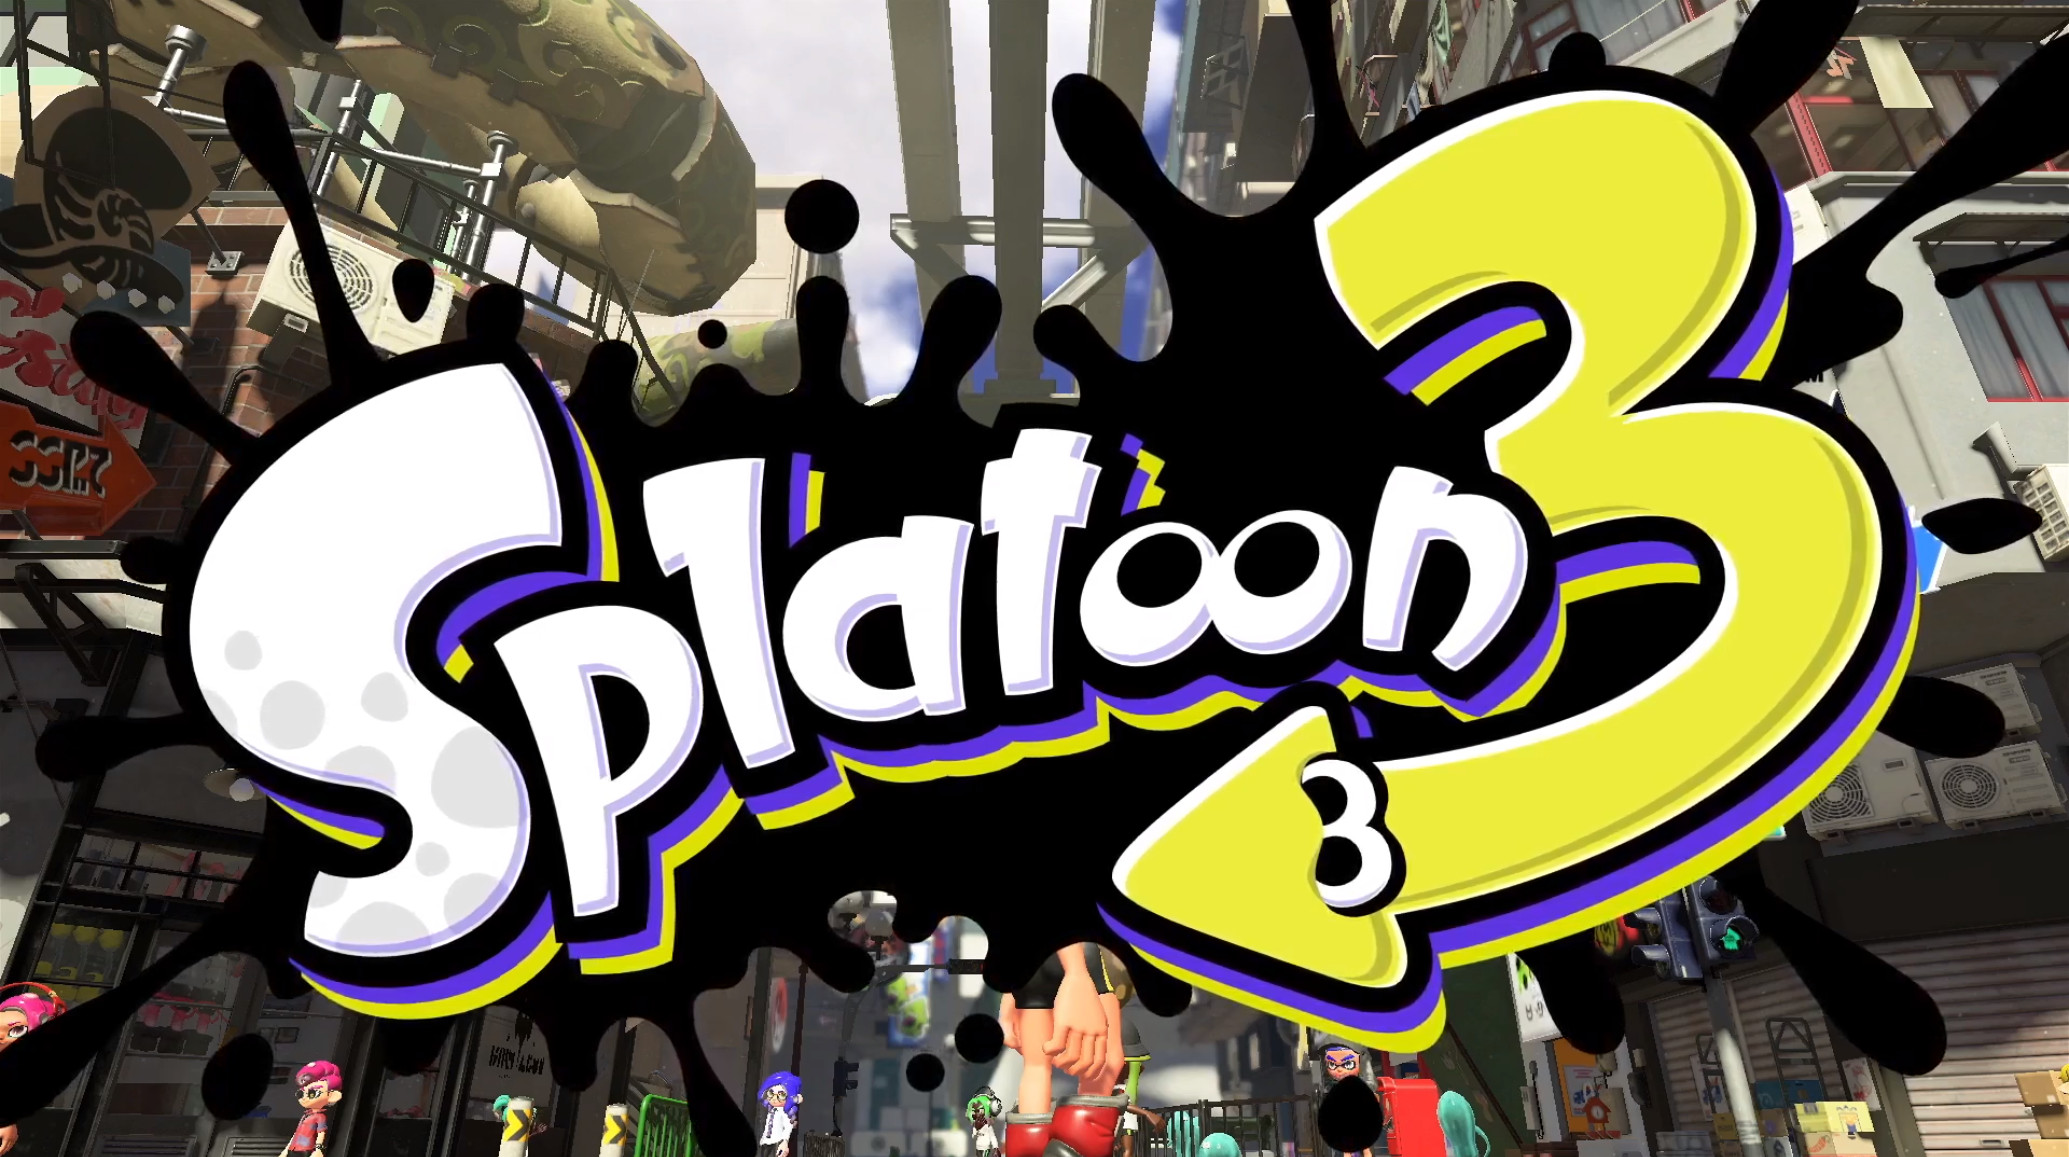 Splatoon 3: Story, Release Date, Gameplay, Trailer and Price. Also, Get the Latest News, Rumours, and All The Details You Need.